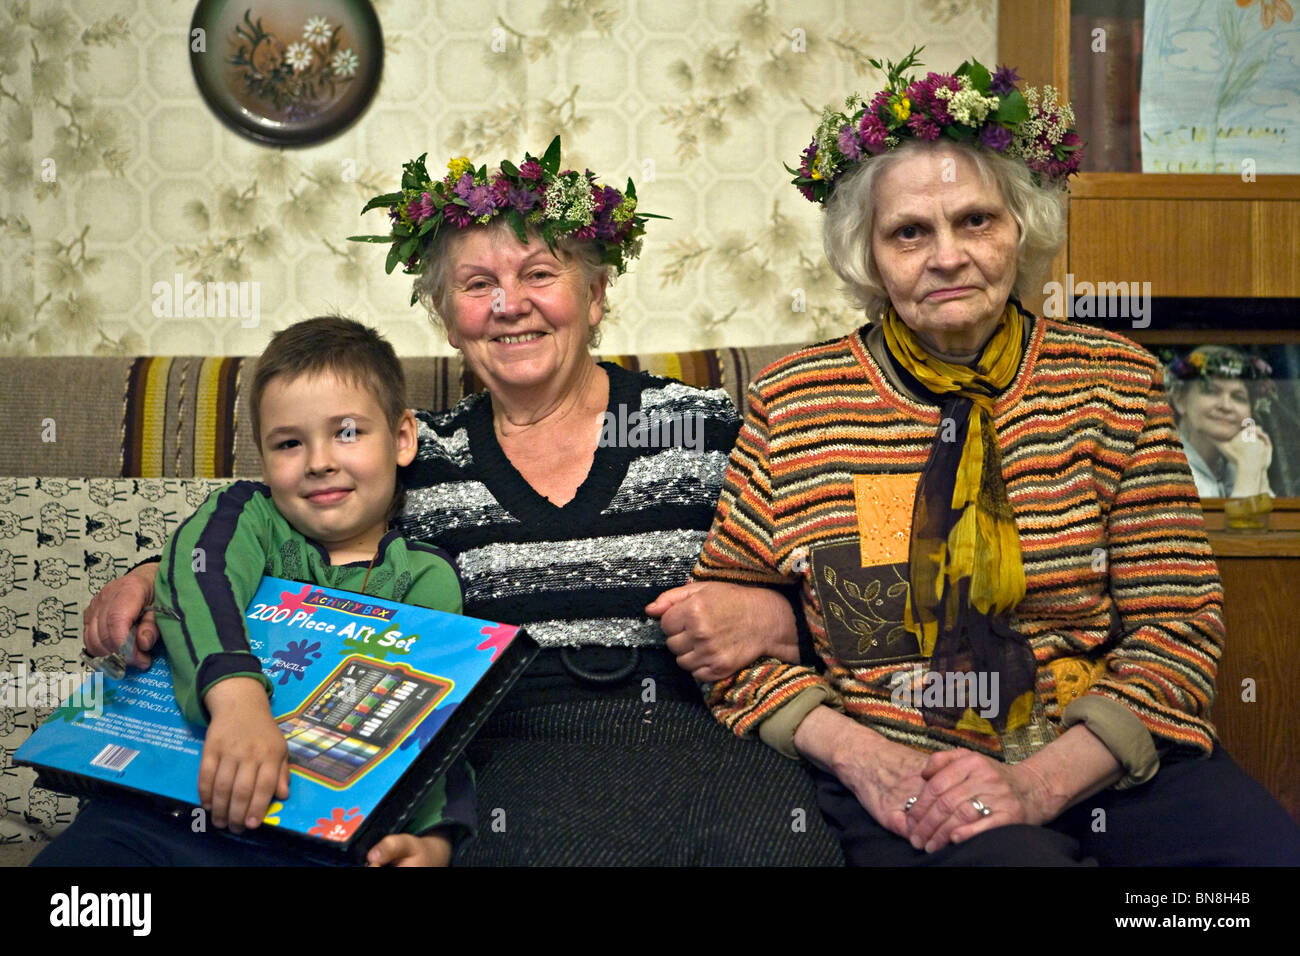 Latvians celebrate summer solstice at home Stock Photo